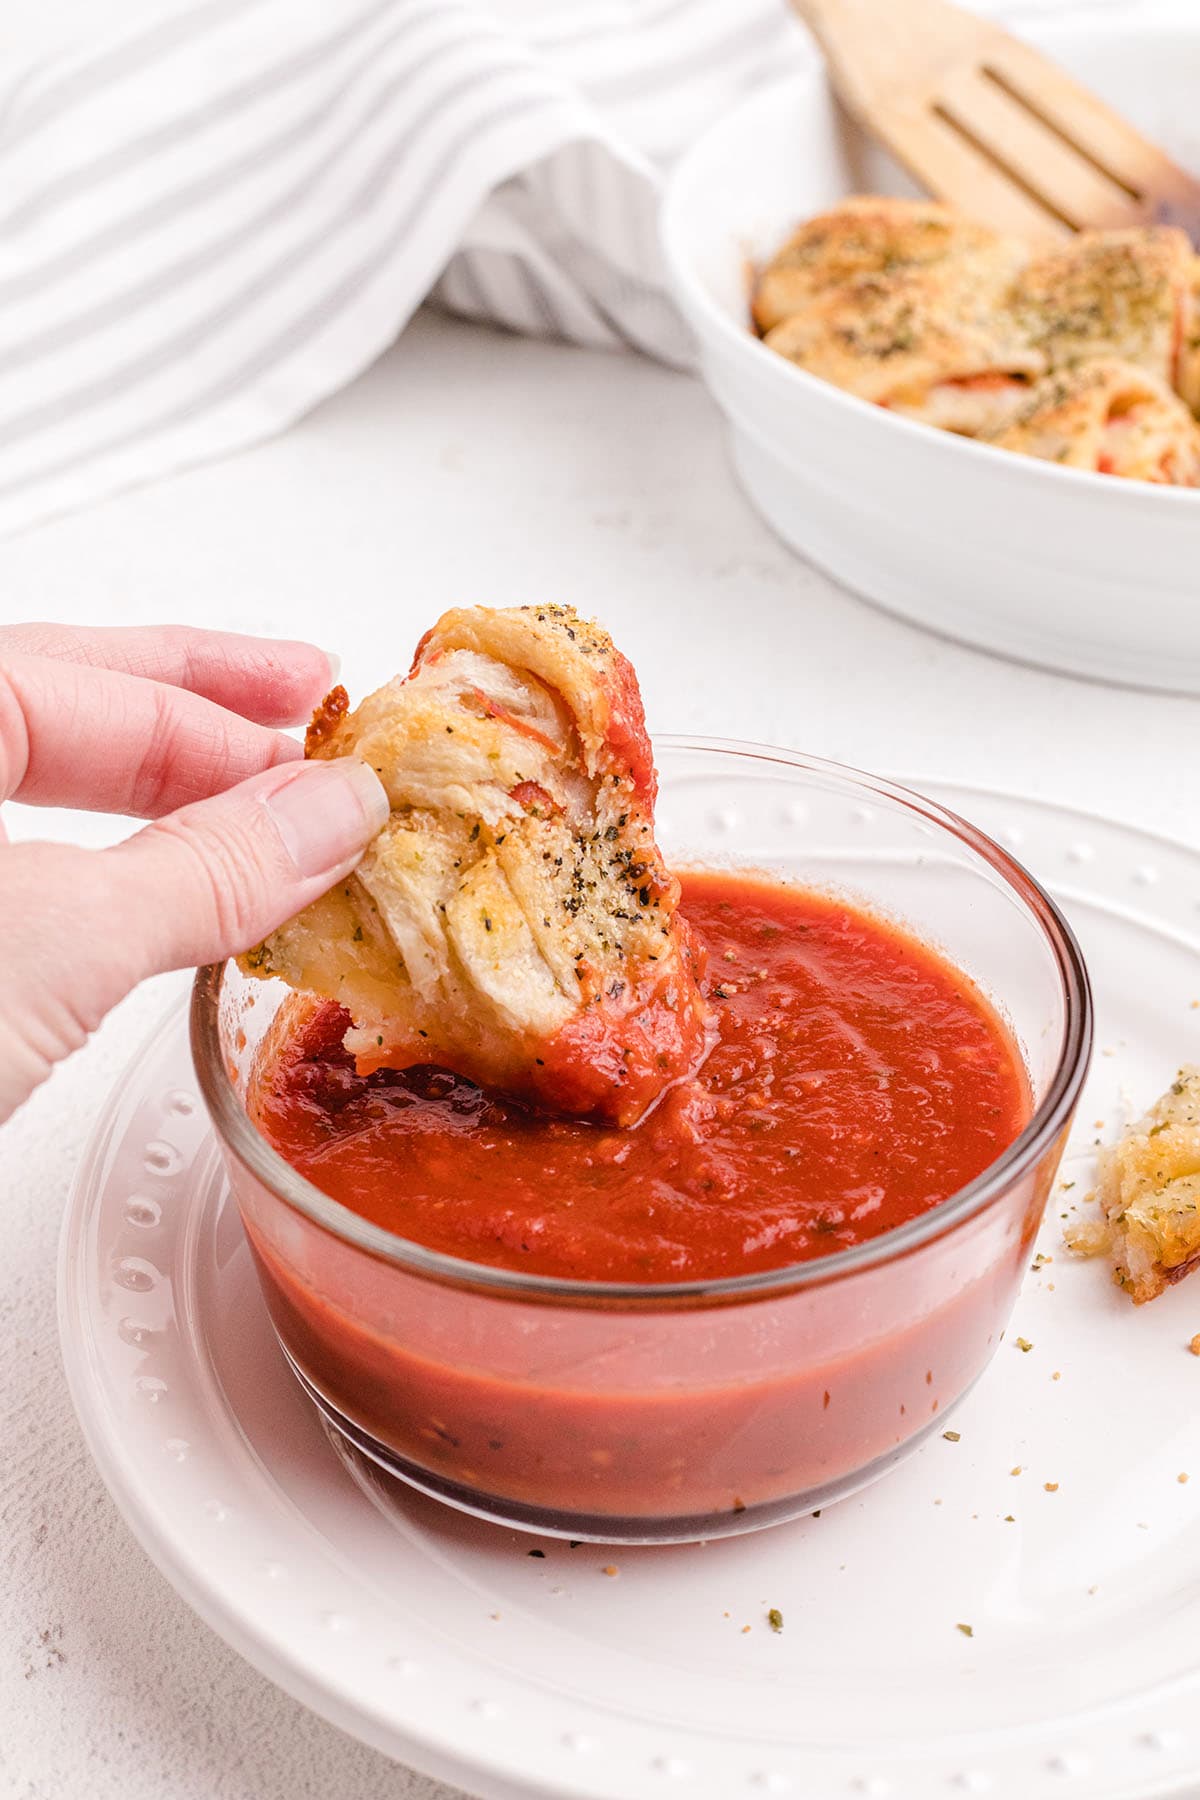 Pepperoni Rolls dipped in sauce